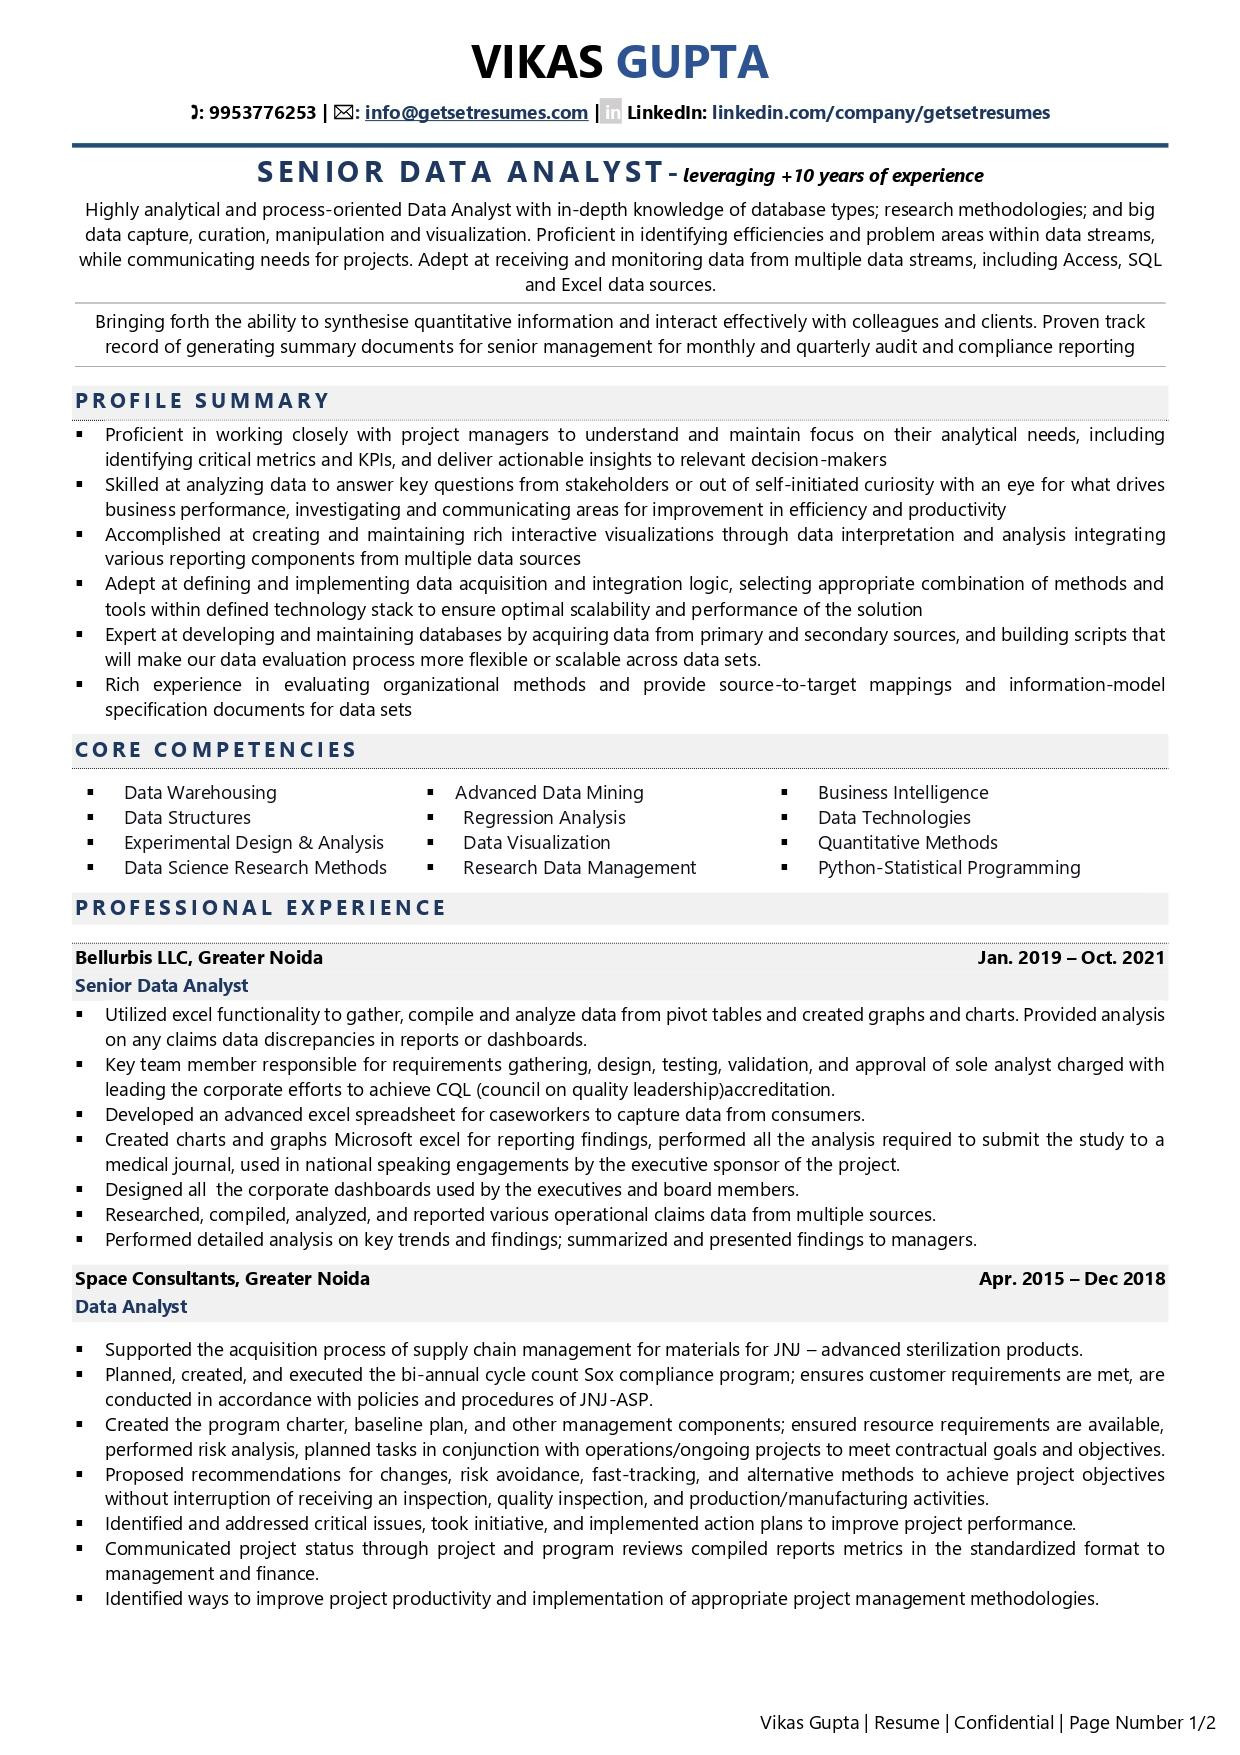 Sample Resume for Healthcare Data Analyst Data Analyst Resume Examples & Template (with Job Winning Tips)